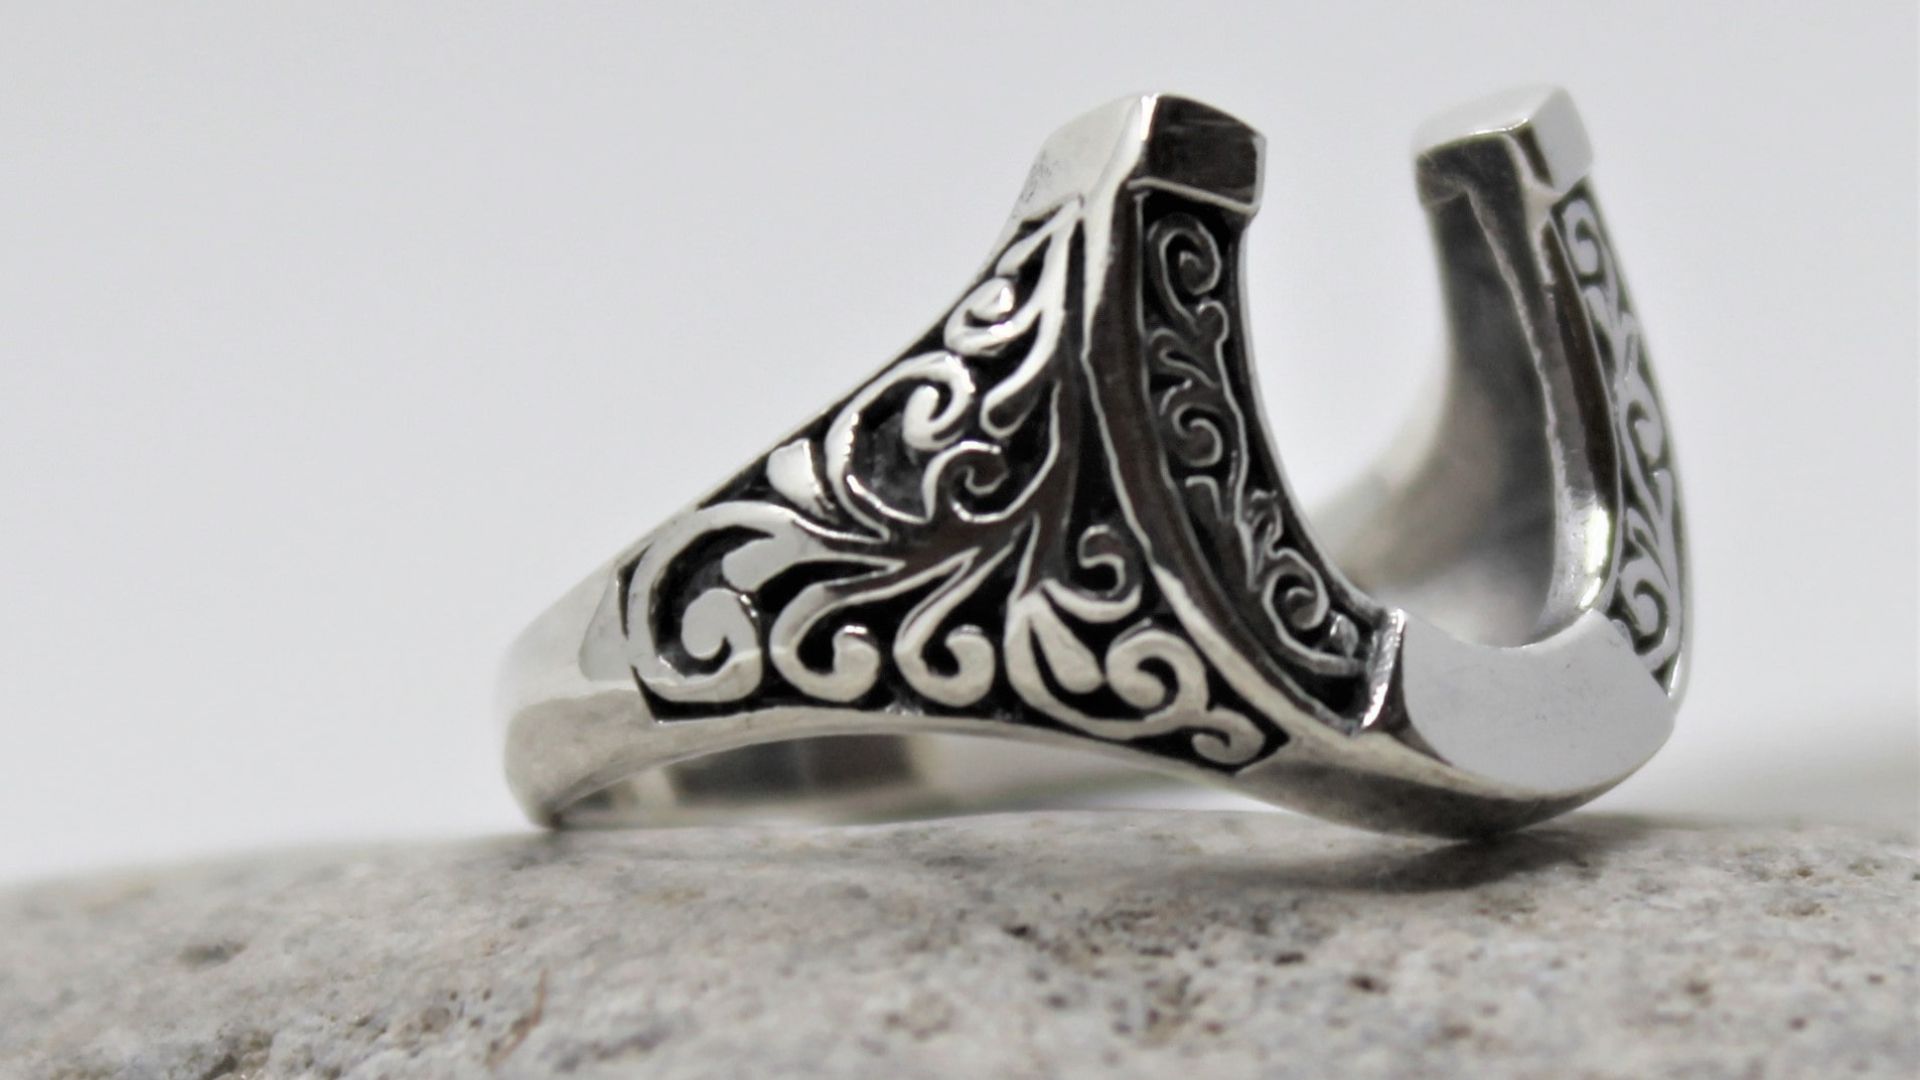 Horseshoe Rings - A Symbol Of Good Luck And Protection